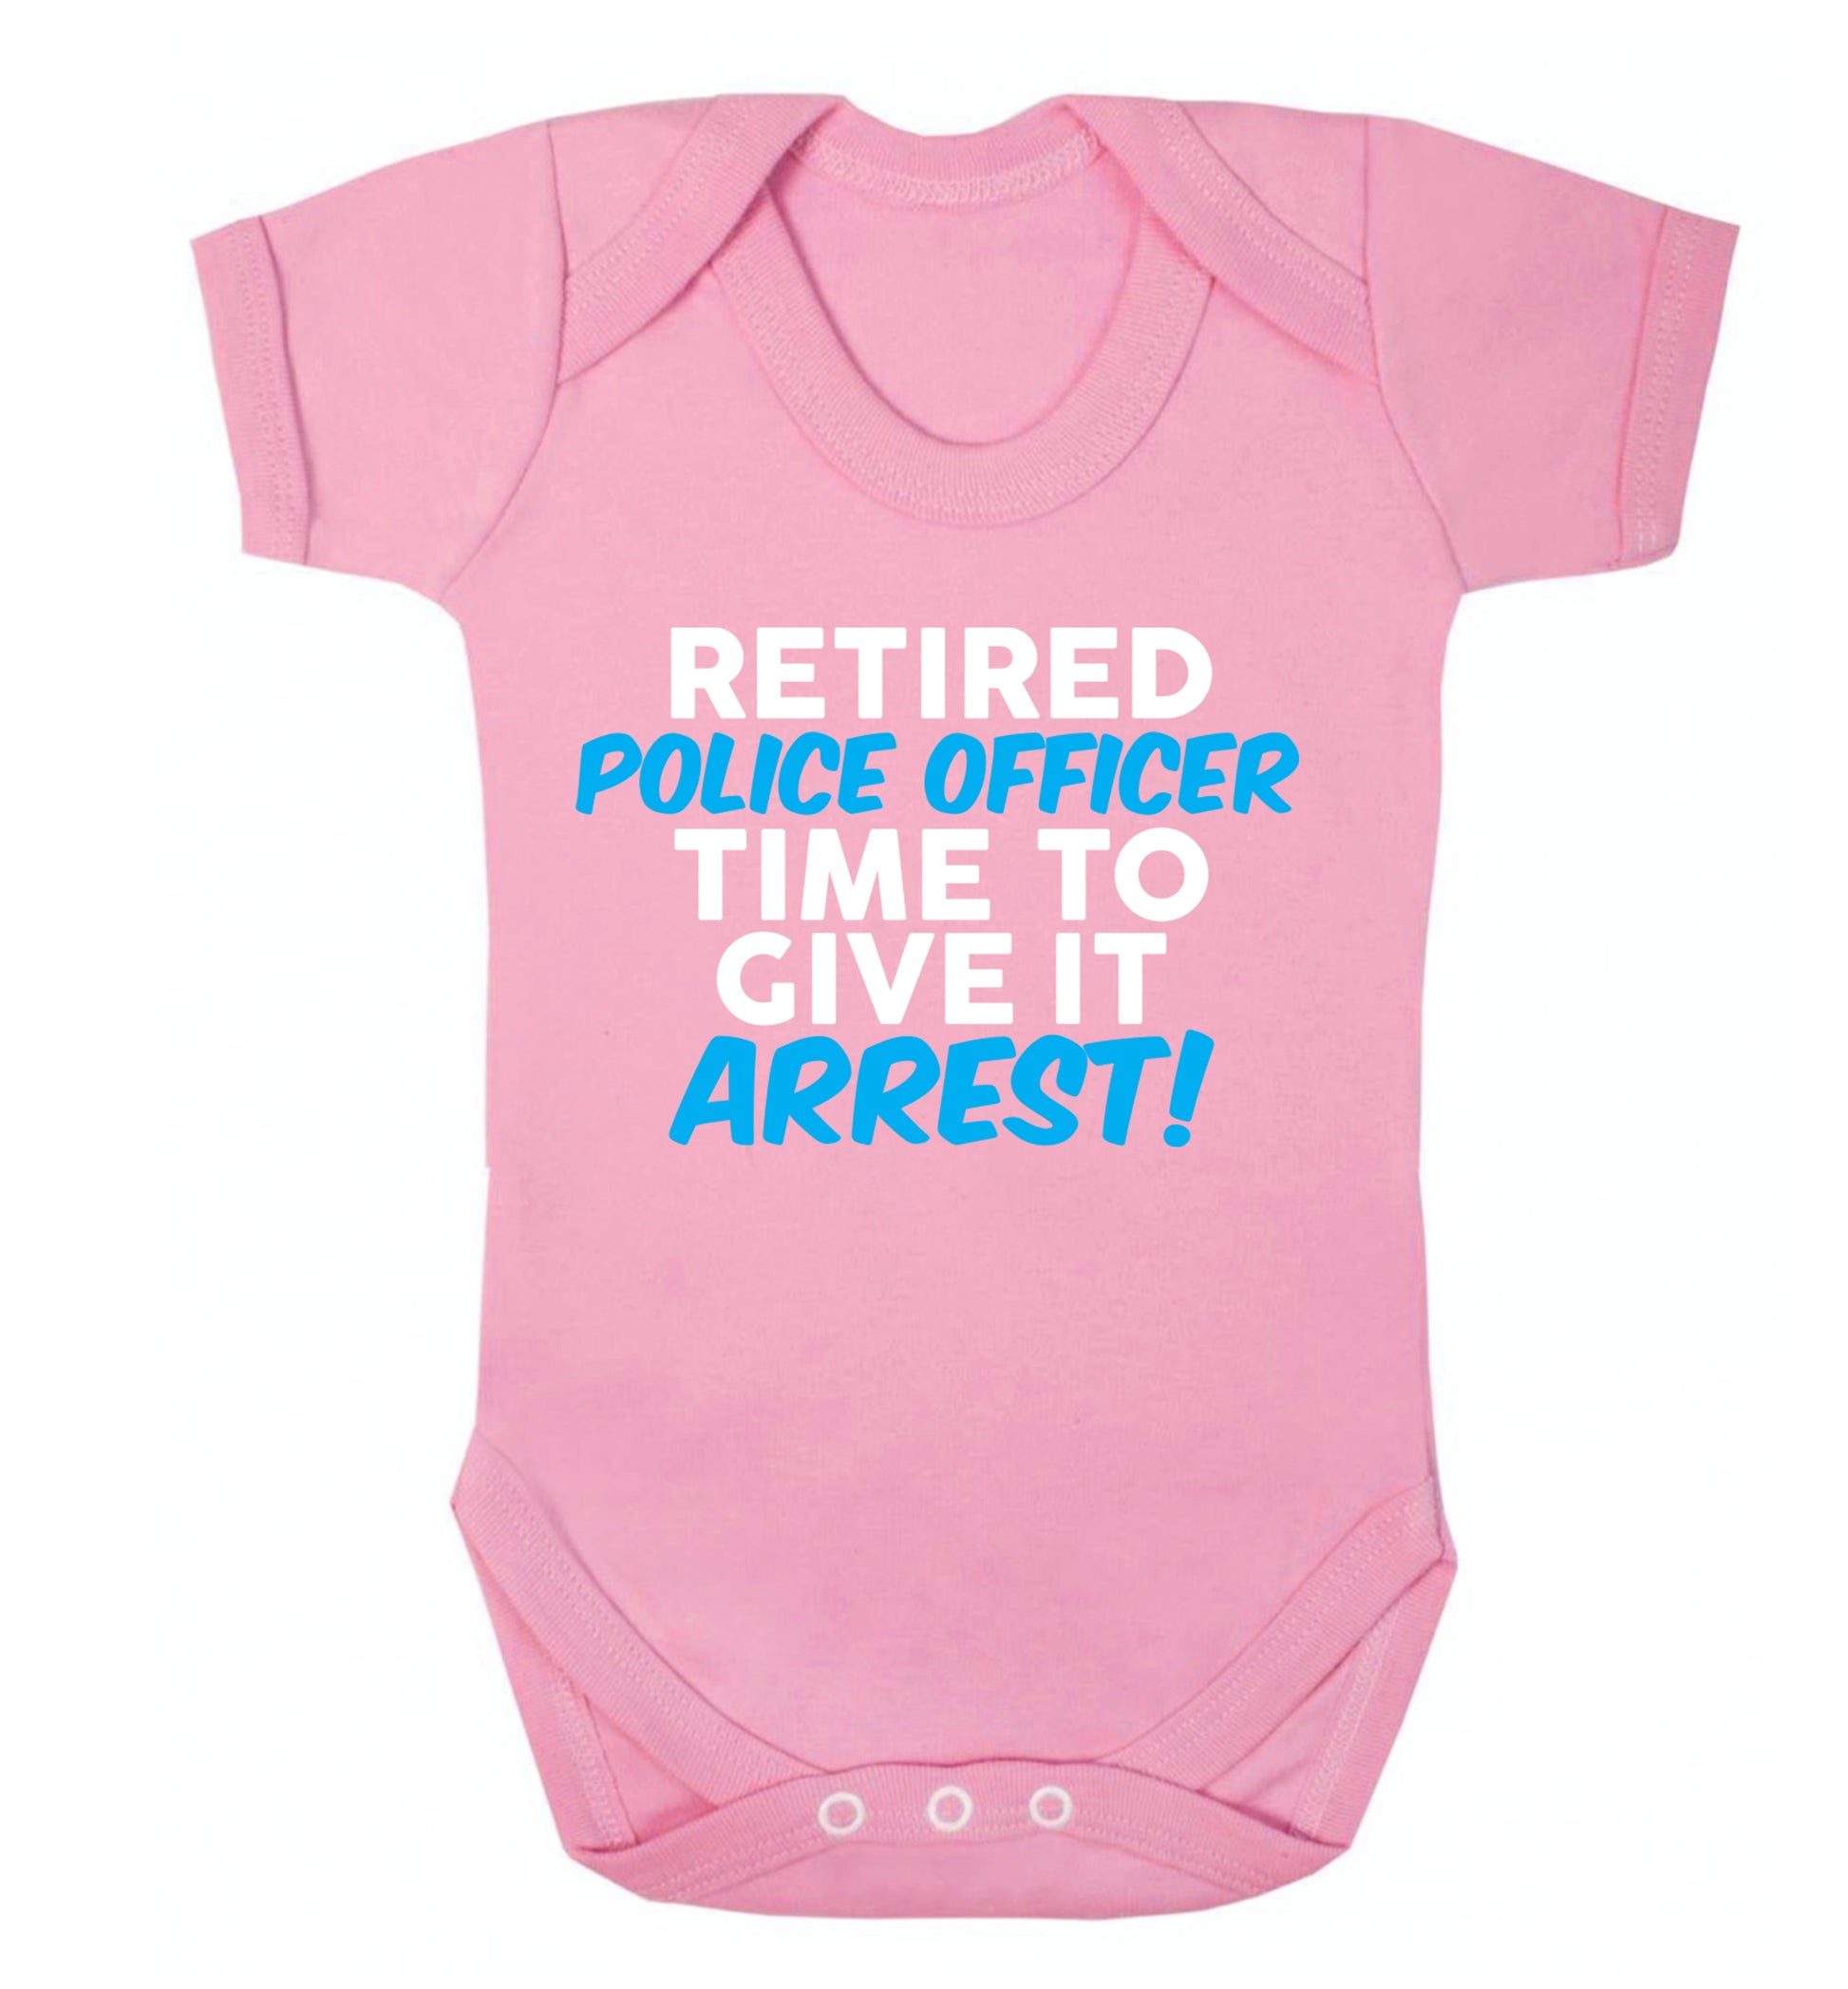 Retired police officer time to give it arrest Baby Vest pale pink 18-24 months